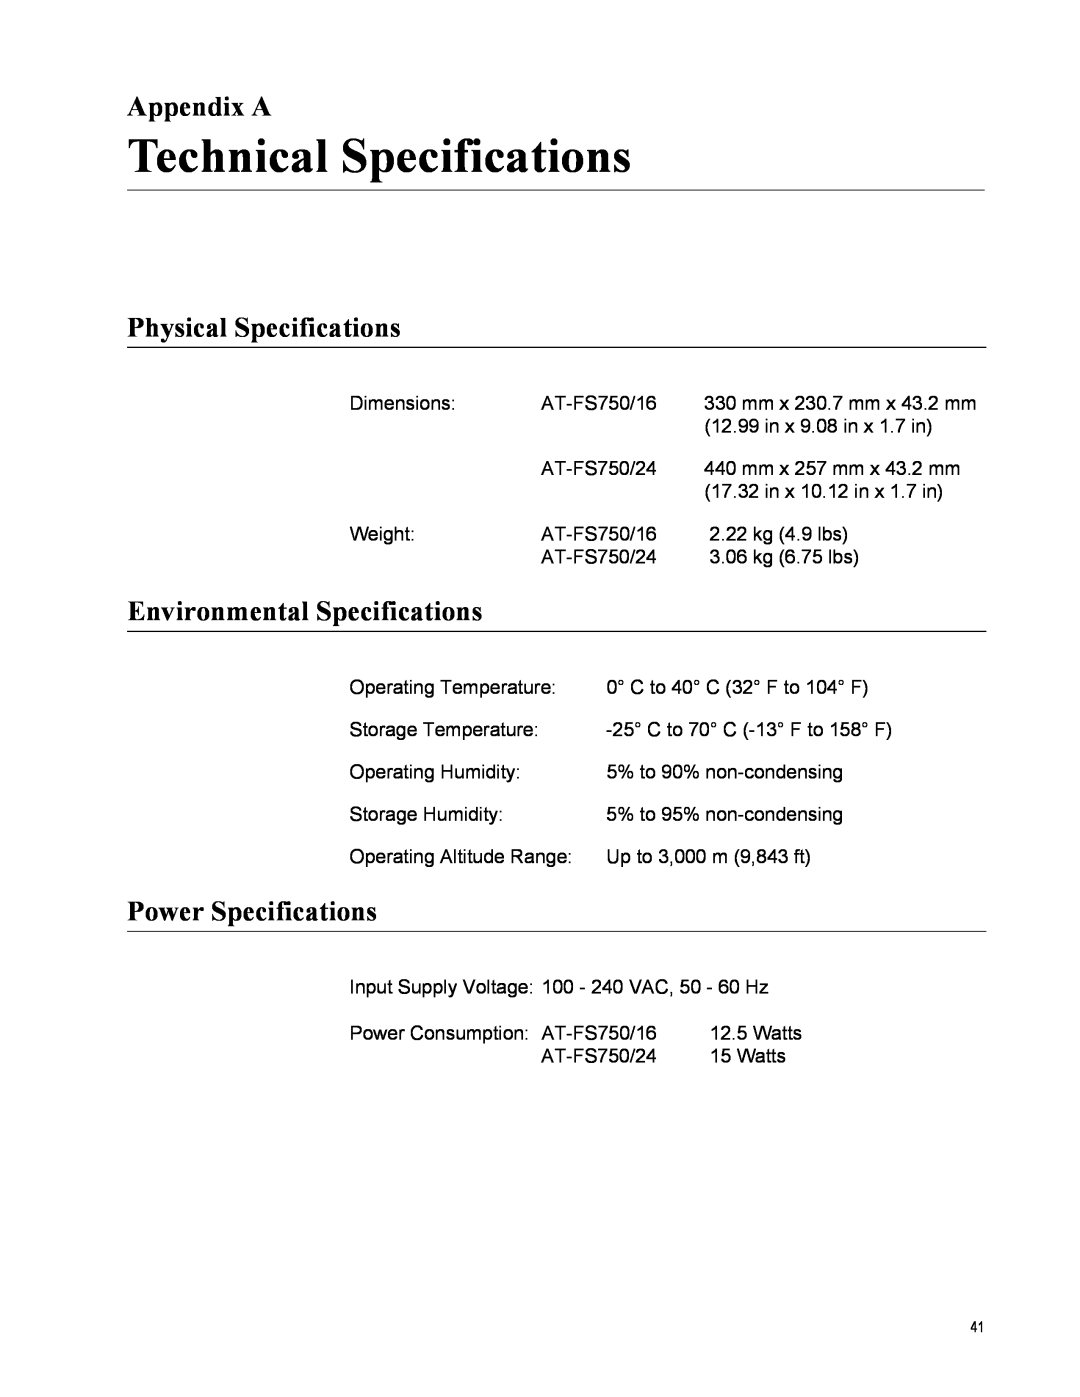 Allied Telesis FS750/24 manual Technical Specifications, Appendix A, Physical Specifications, Environmental Specifications 